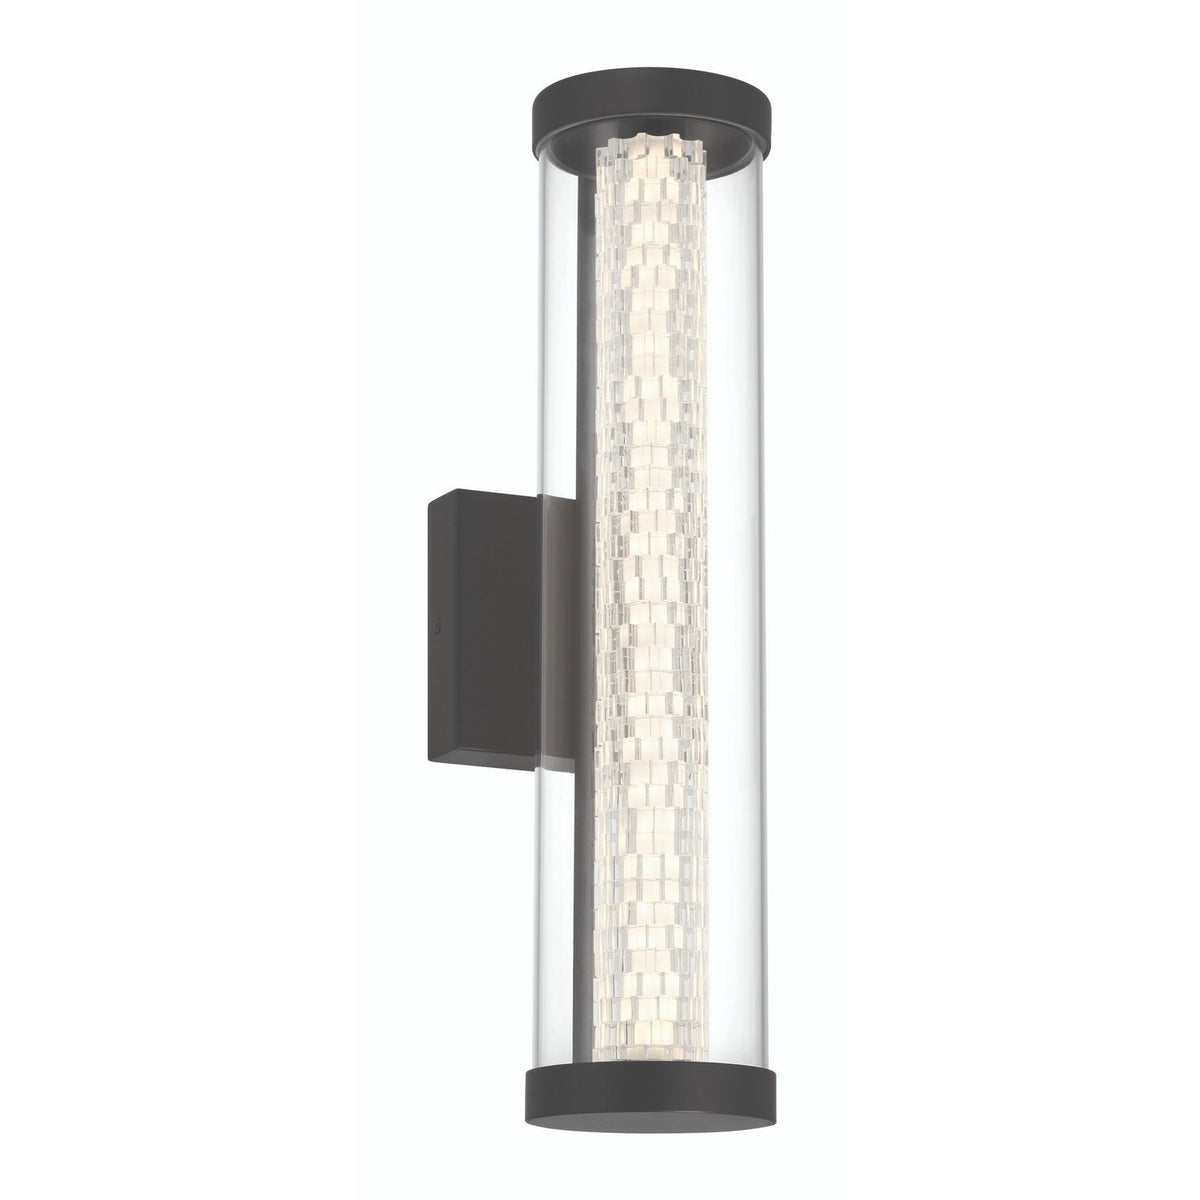 Savron LED Outdoor Wall Sconce